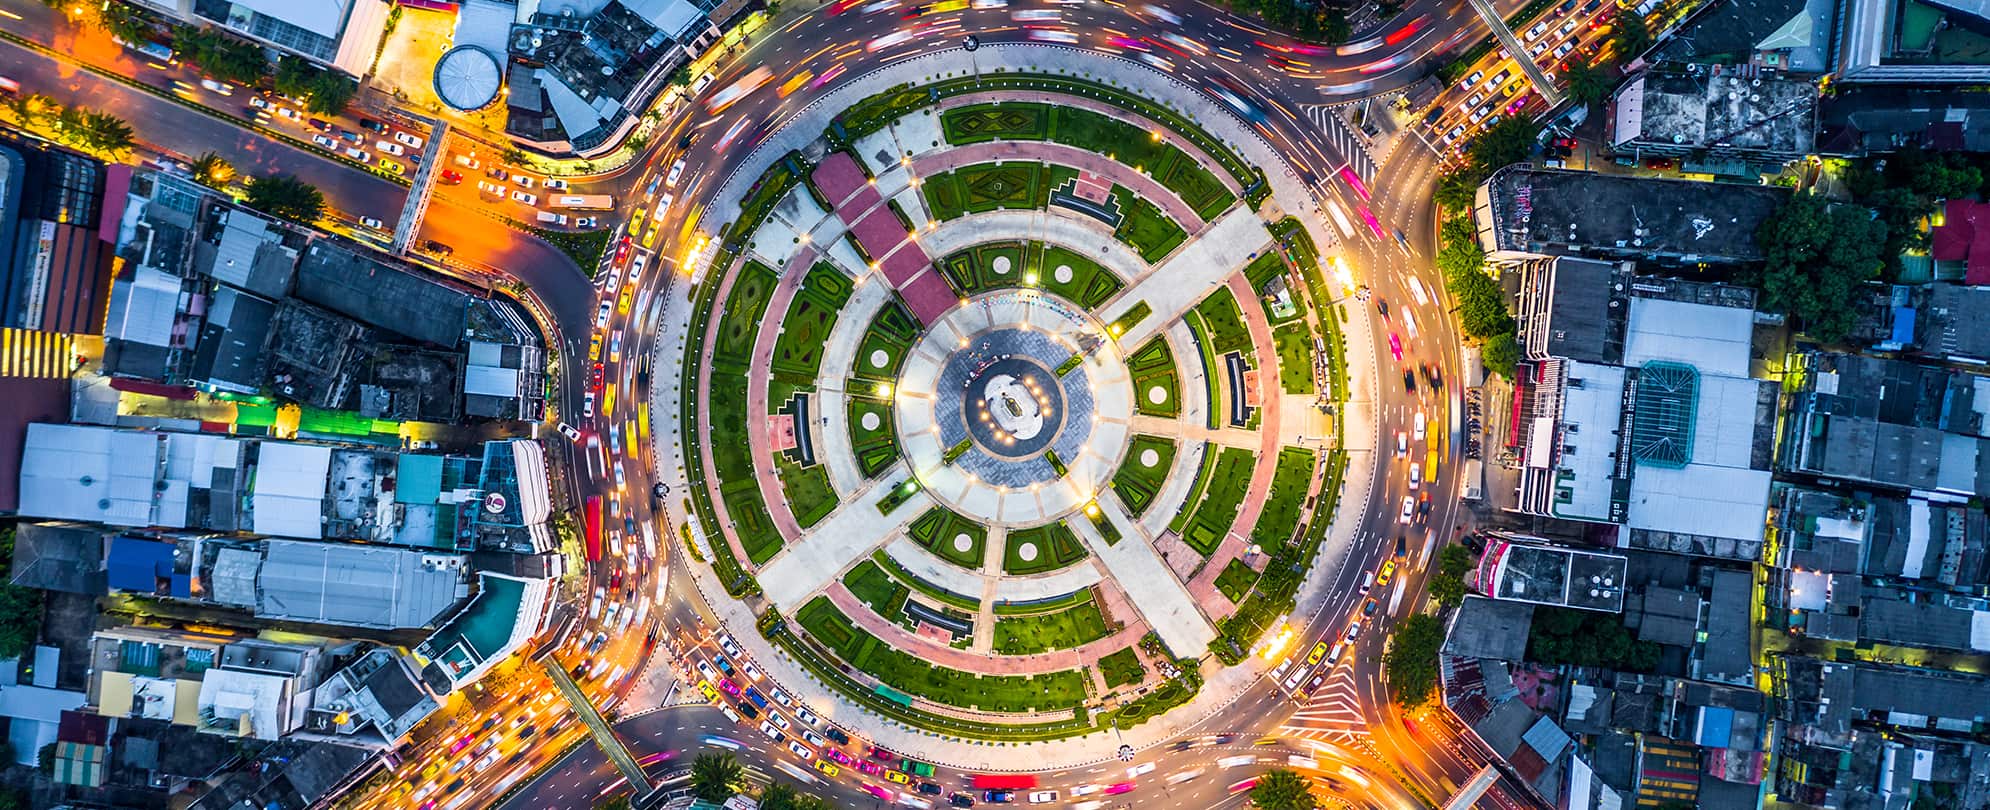 Overhead view of large roundabout 